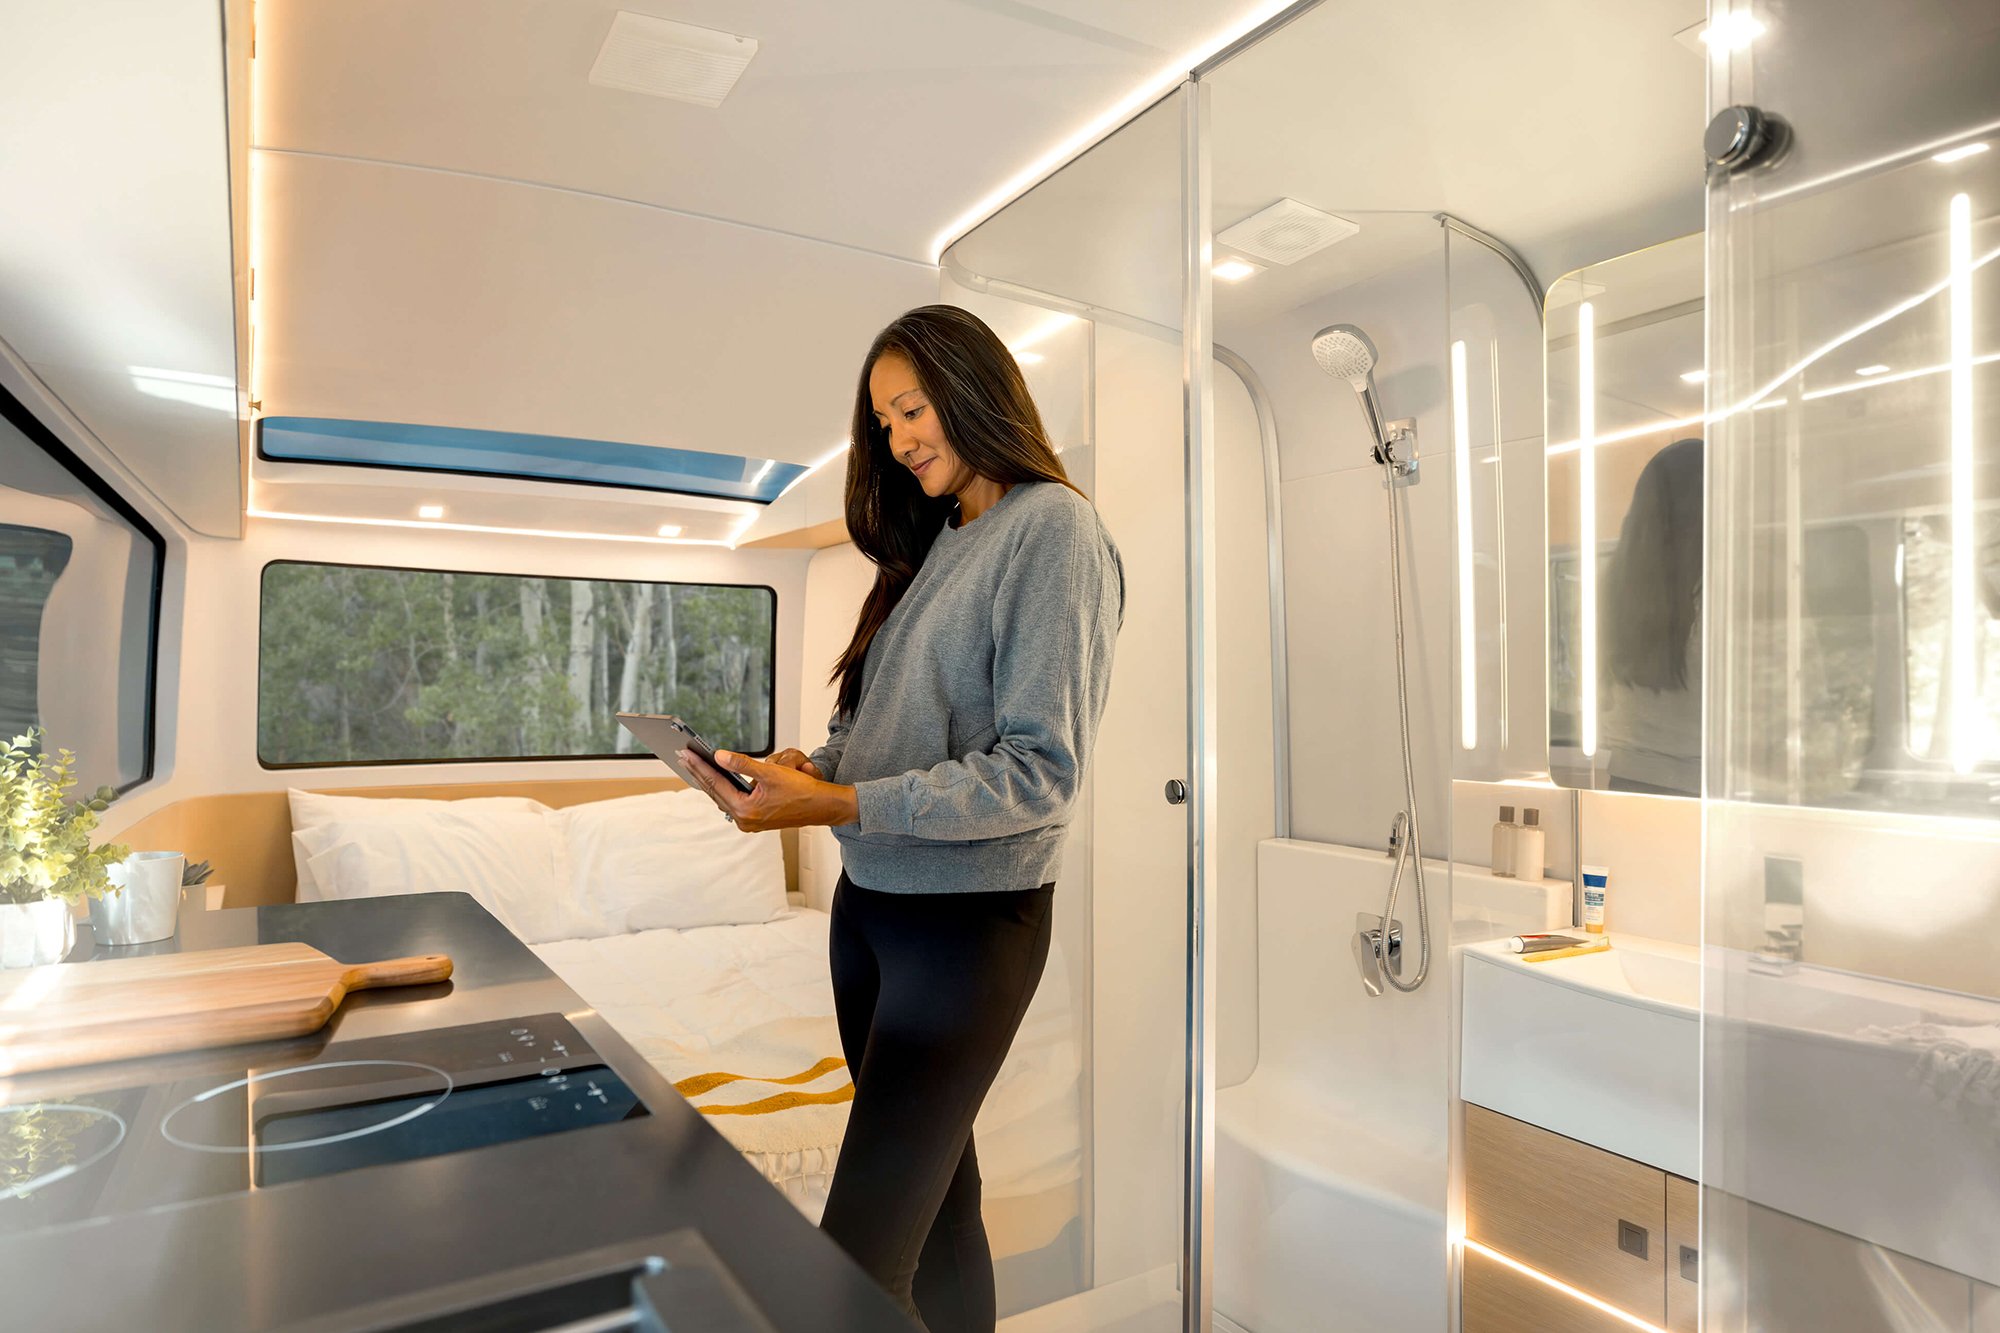 The kitchen and bathroom design of the all-electric, self-propelled travel trailer Pebble Flow